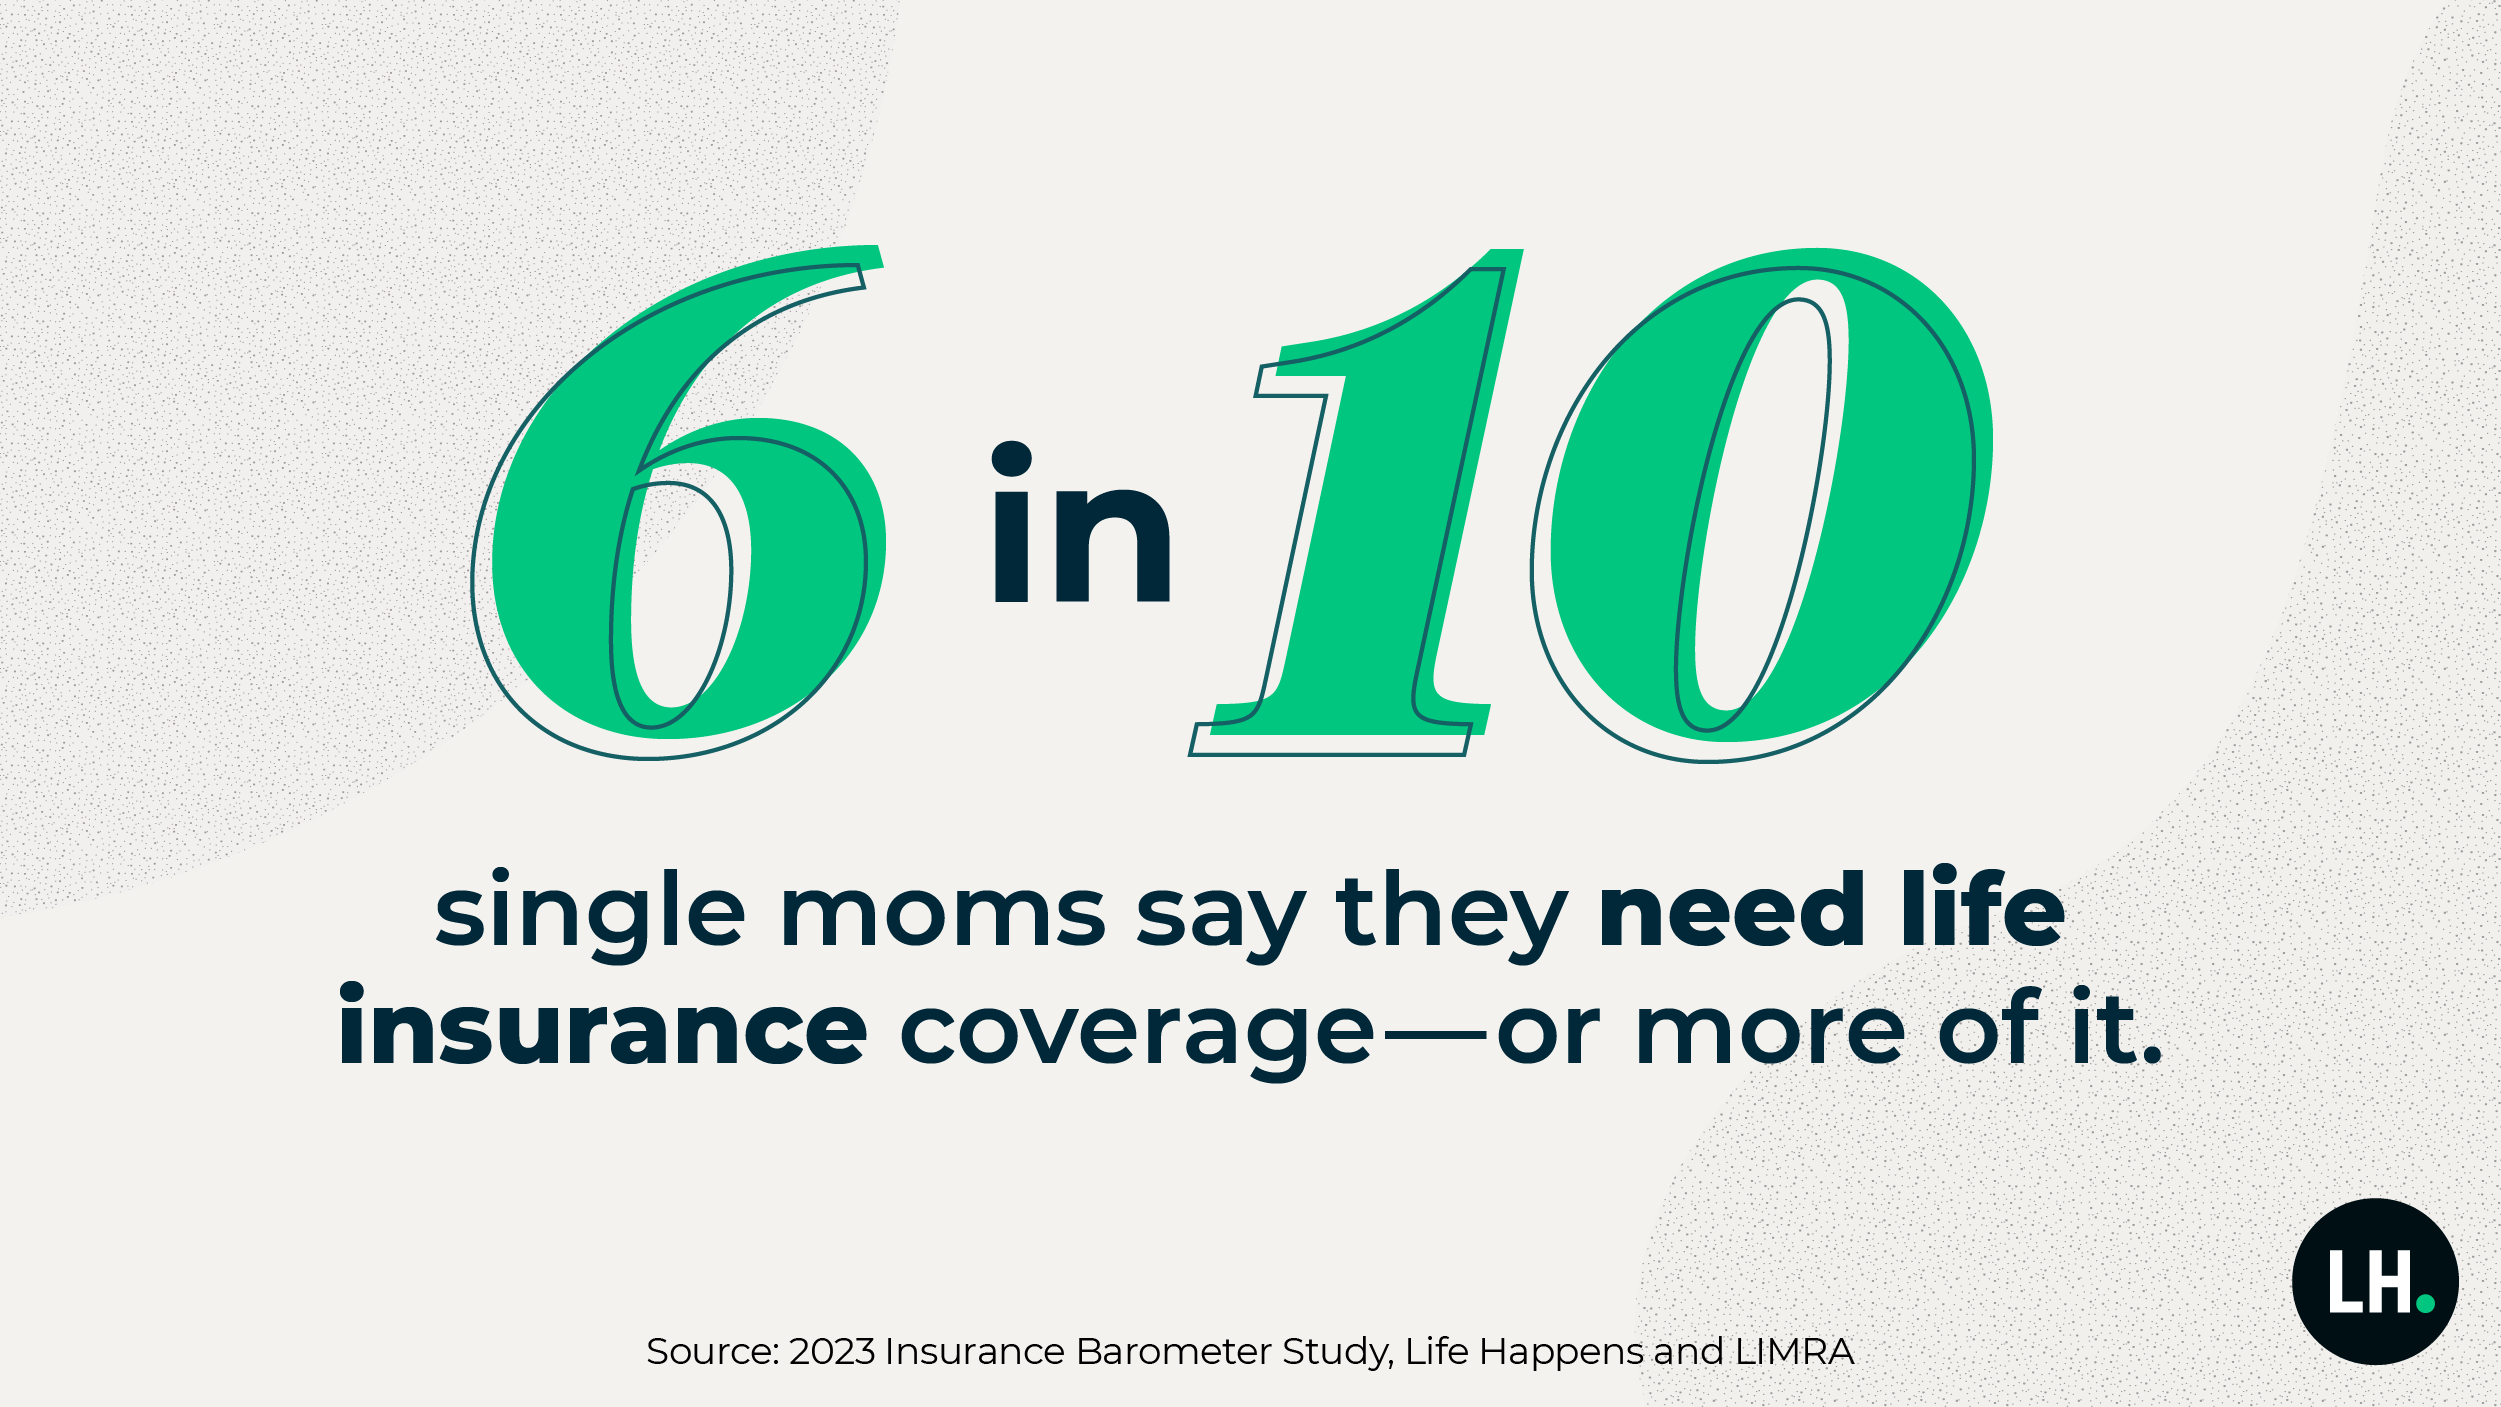 6 in 10 single moms say they need life insurance coverage—or more of it.